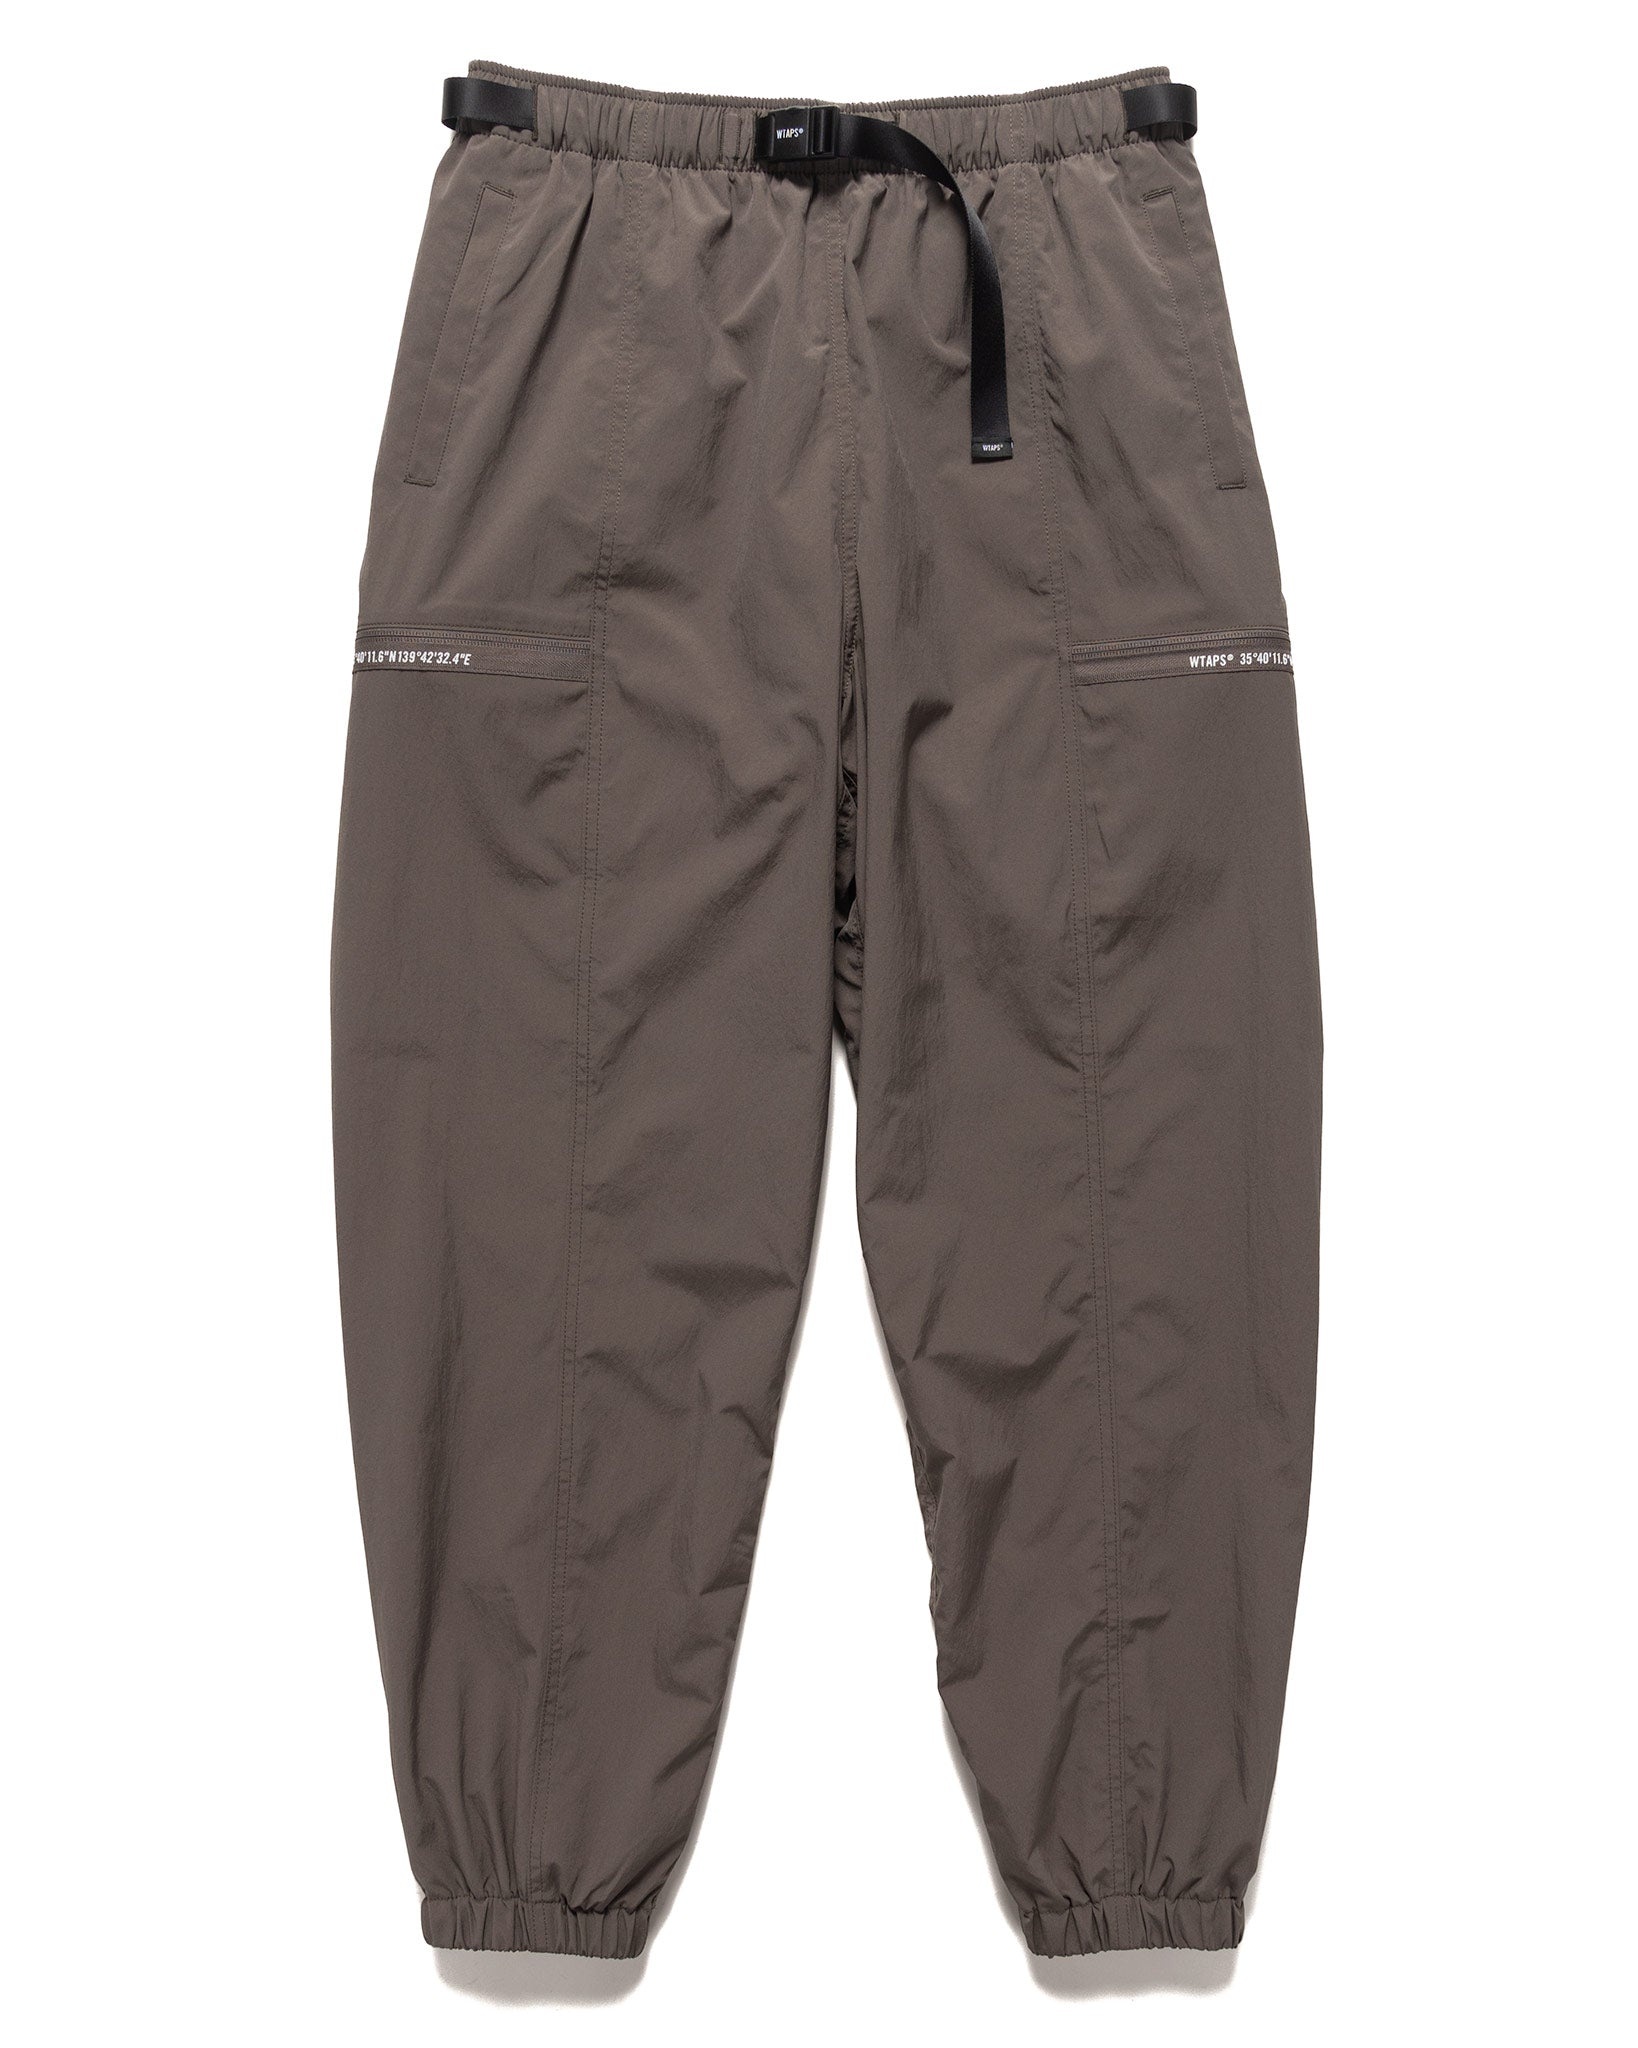 SPST2002 / Trousers / Poly. Tussah Greige - 1